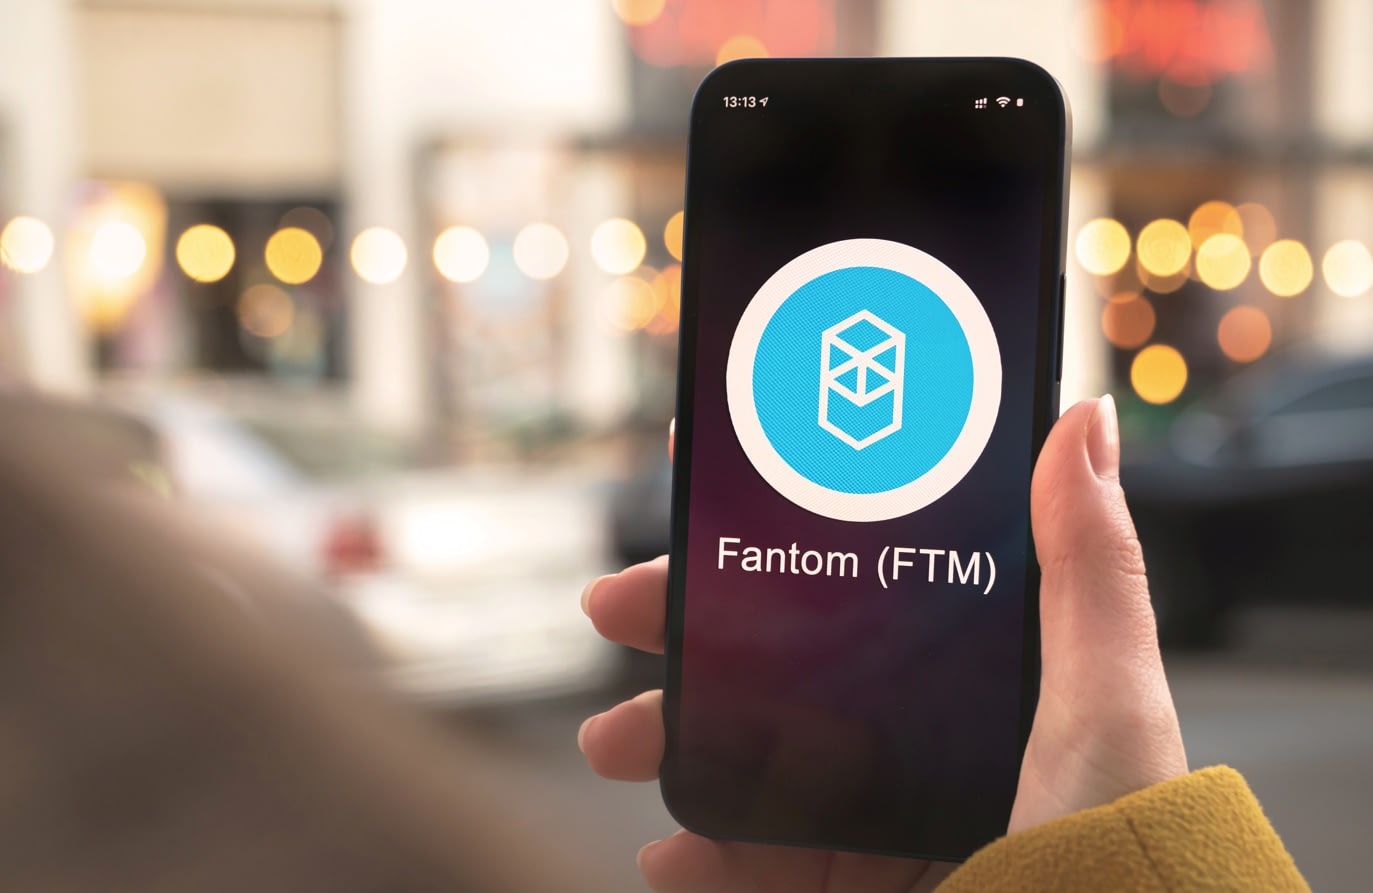 Fantom price slips below $1.00 amid wider crypto sell-off